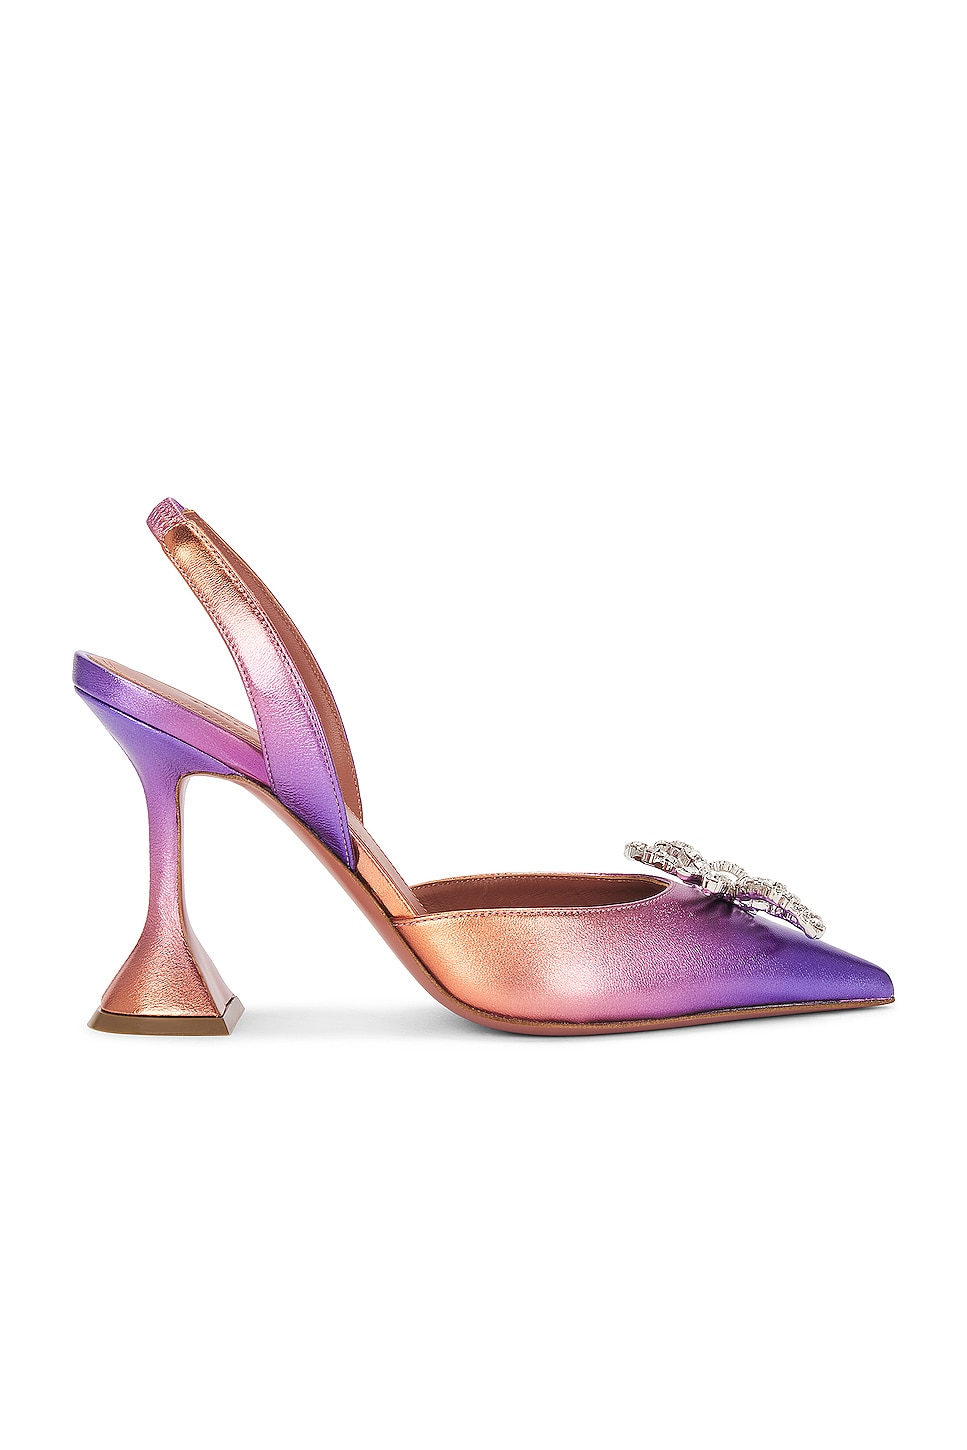 Image 1 of AMINA MUADDI Rosie Sling Pump in Sunset Ombre & White Crystal